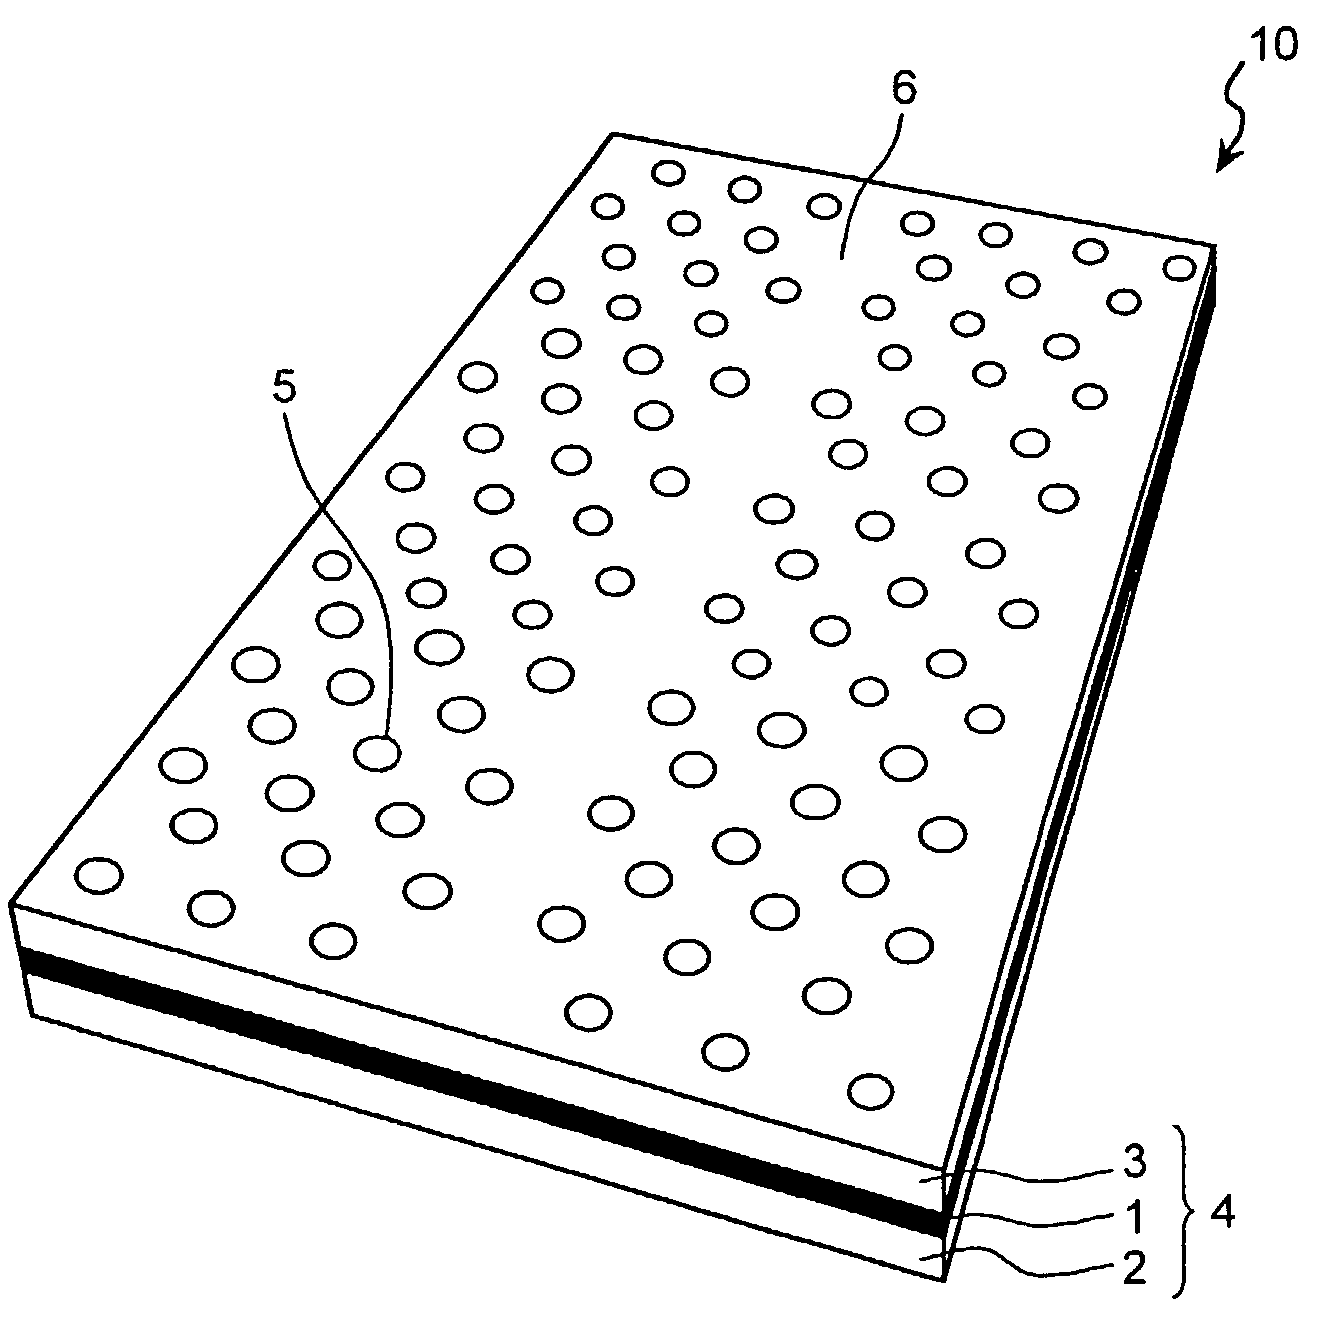 Optical active device